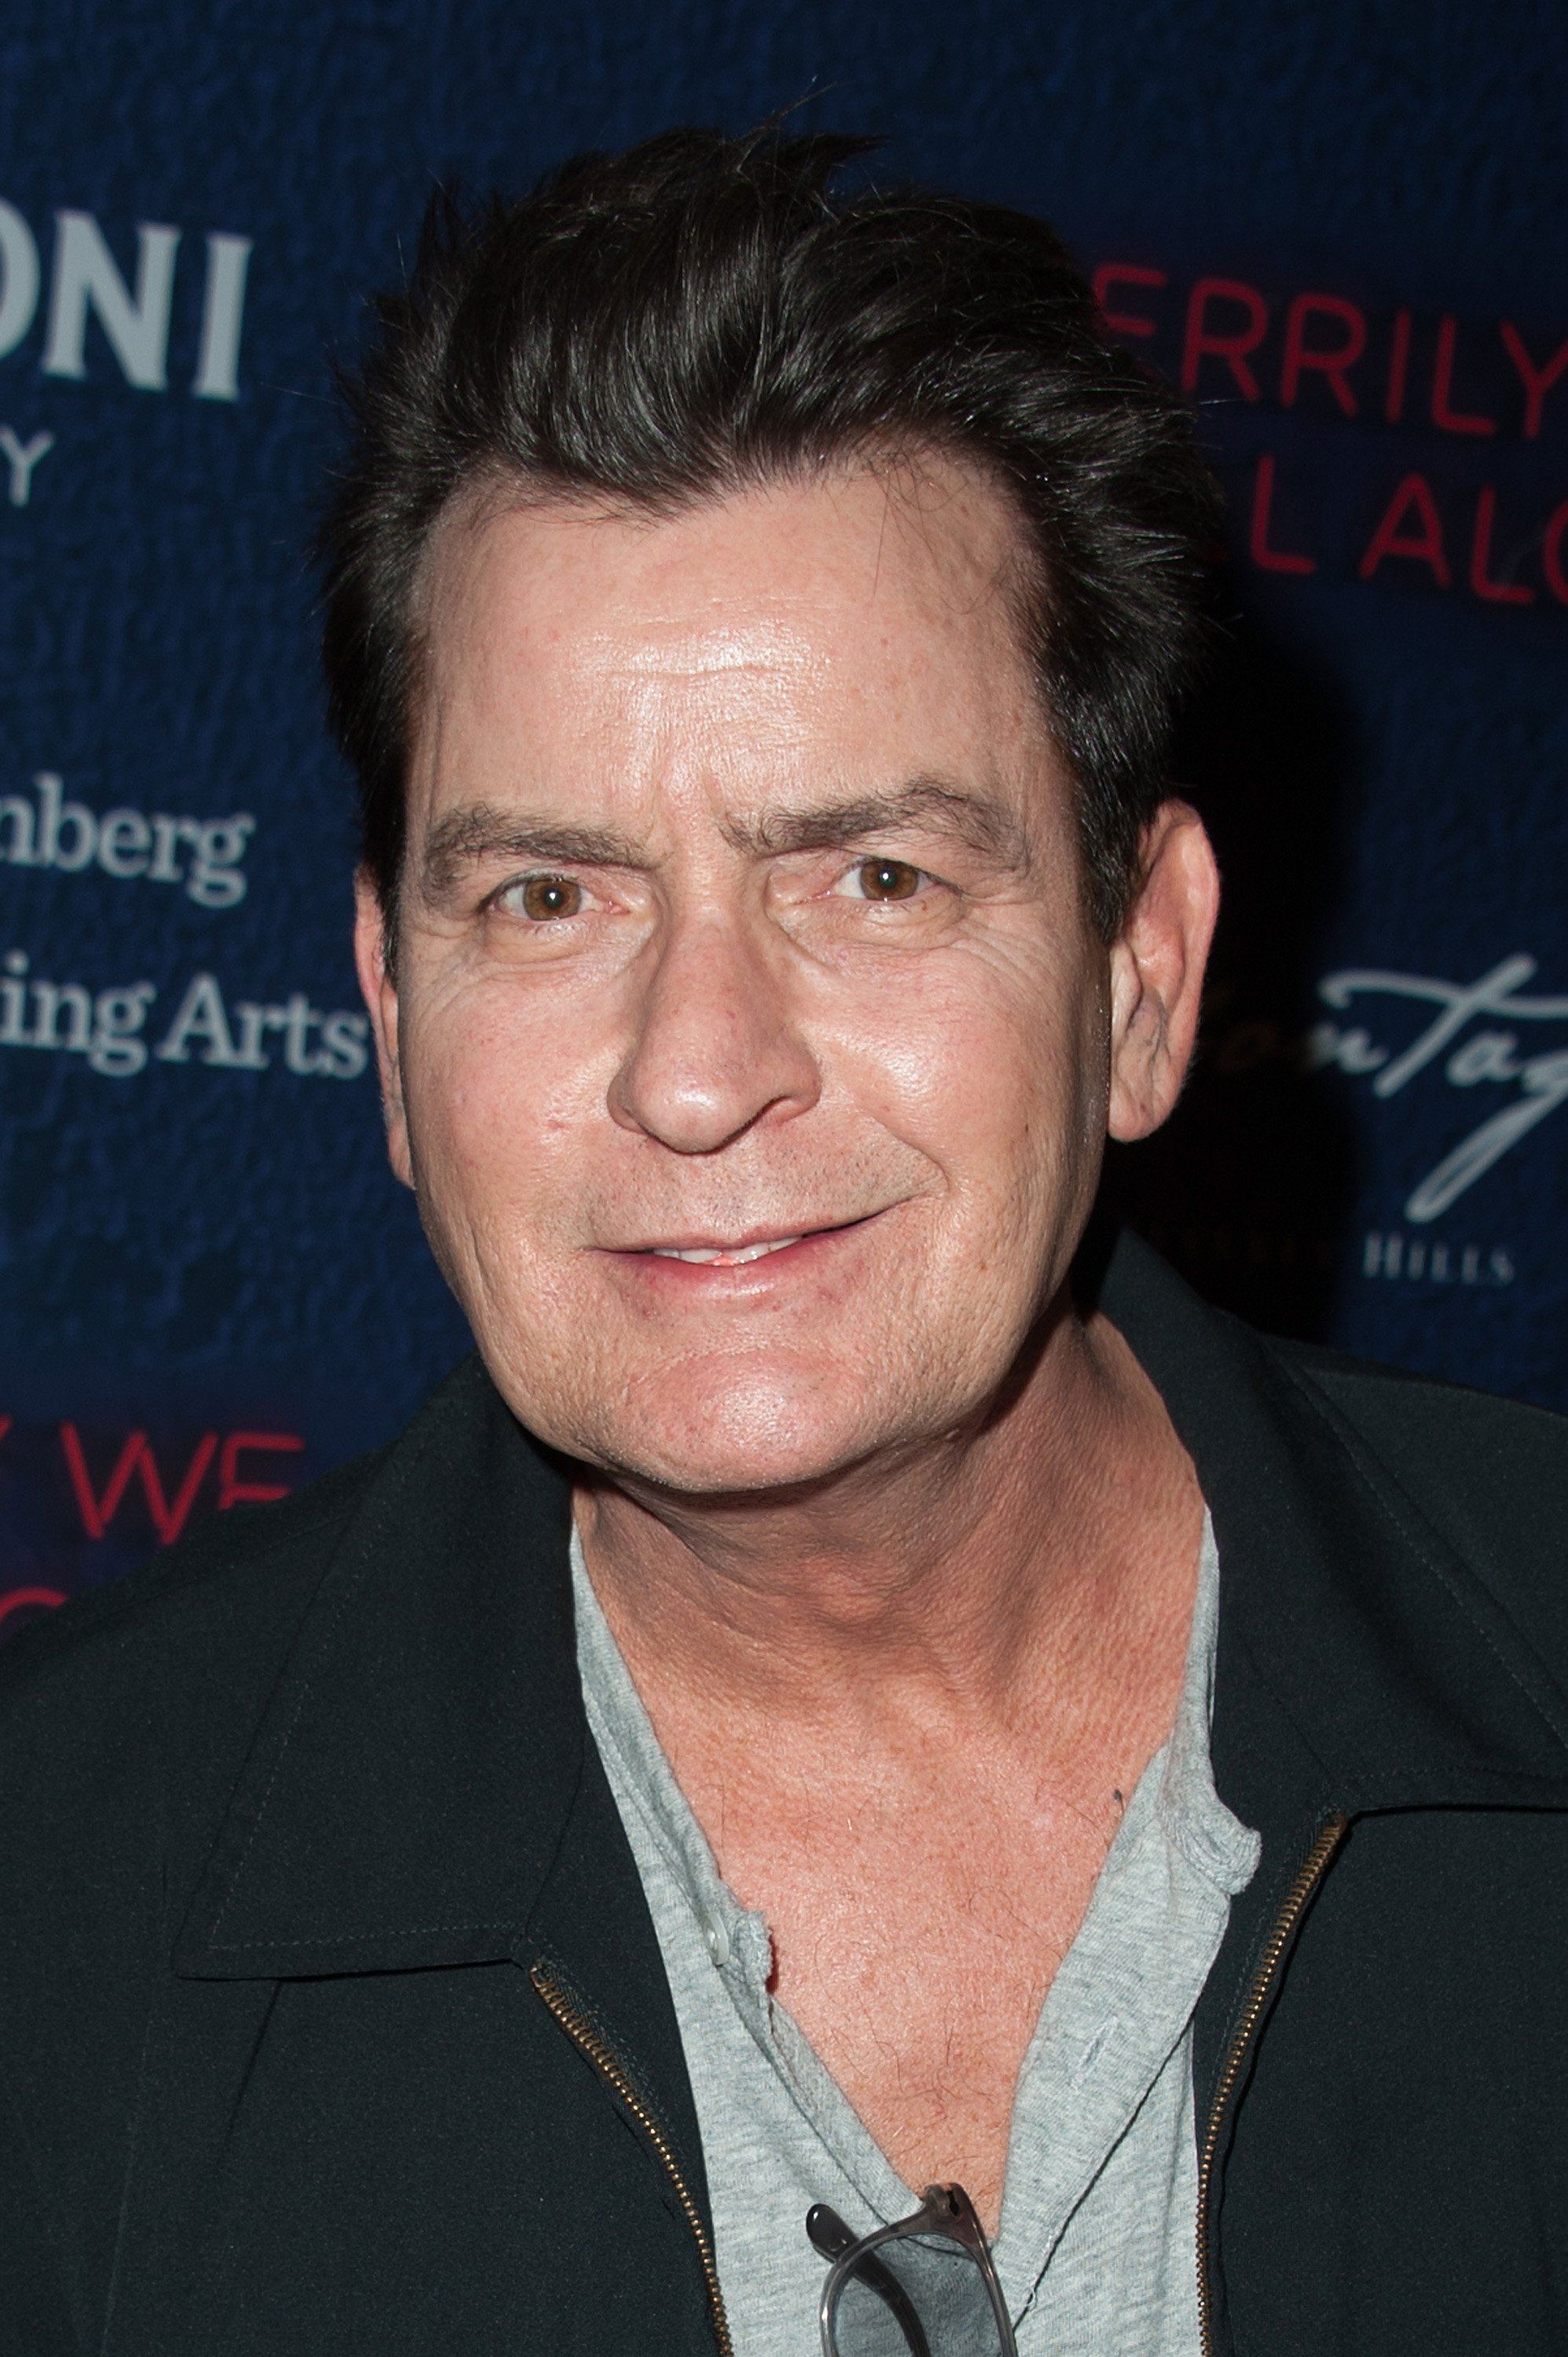 Charlie Sheen attends opening night of "Merrily We Roll Along" in Beverly Hills, California on November 30, 2016 | Photo: Getty Images